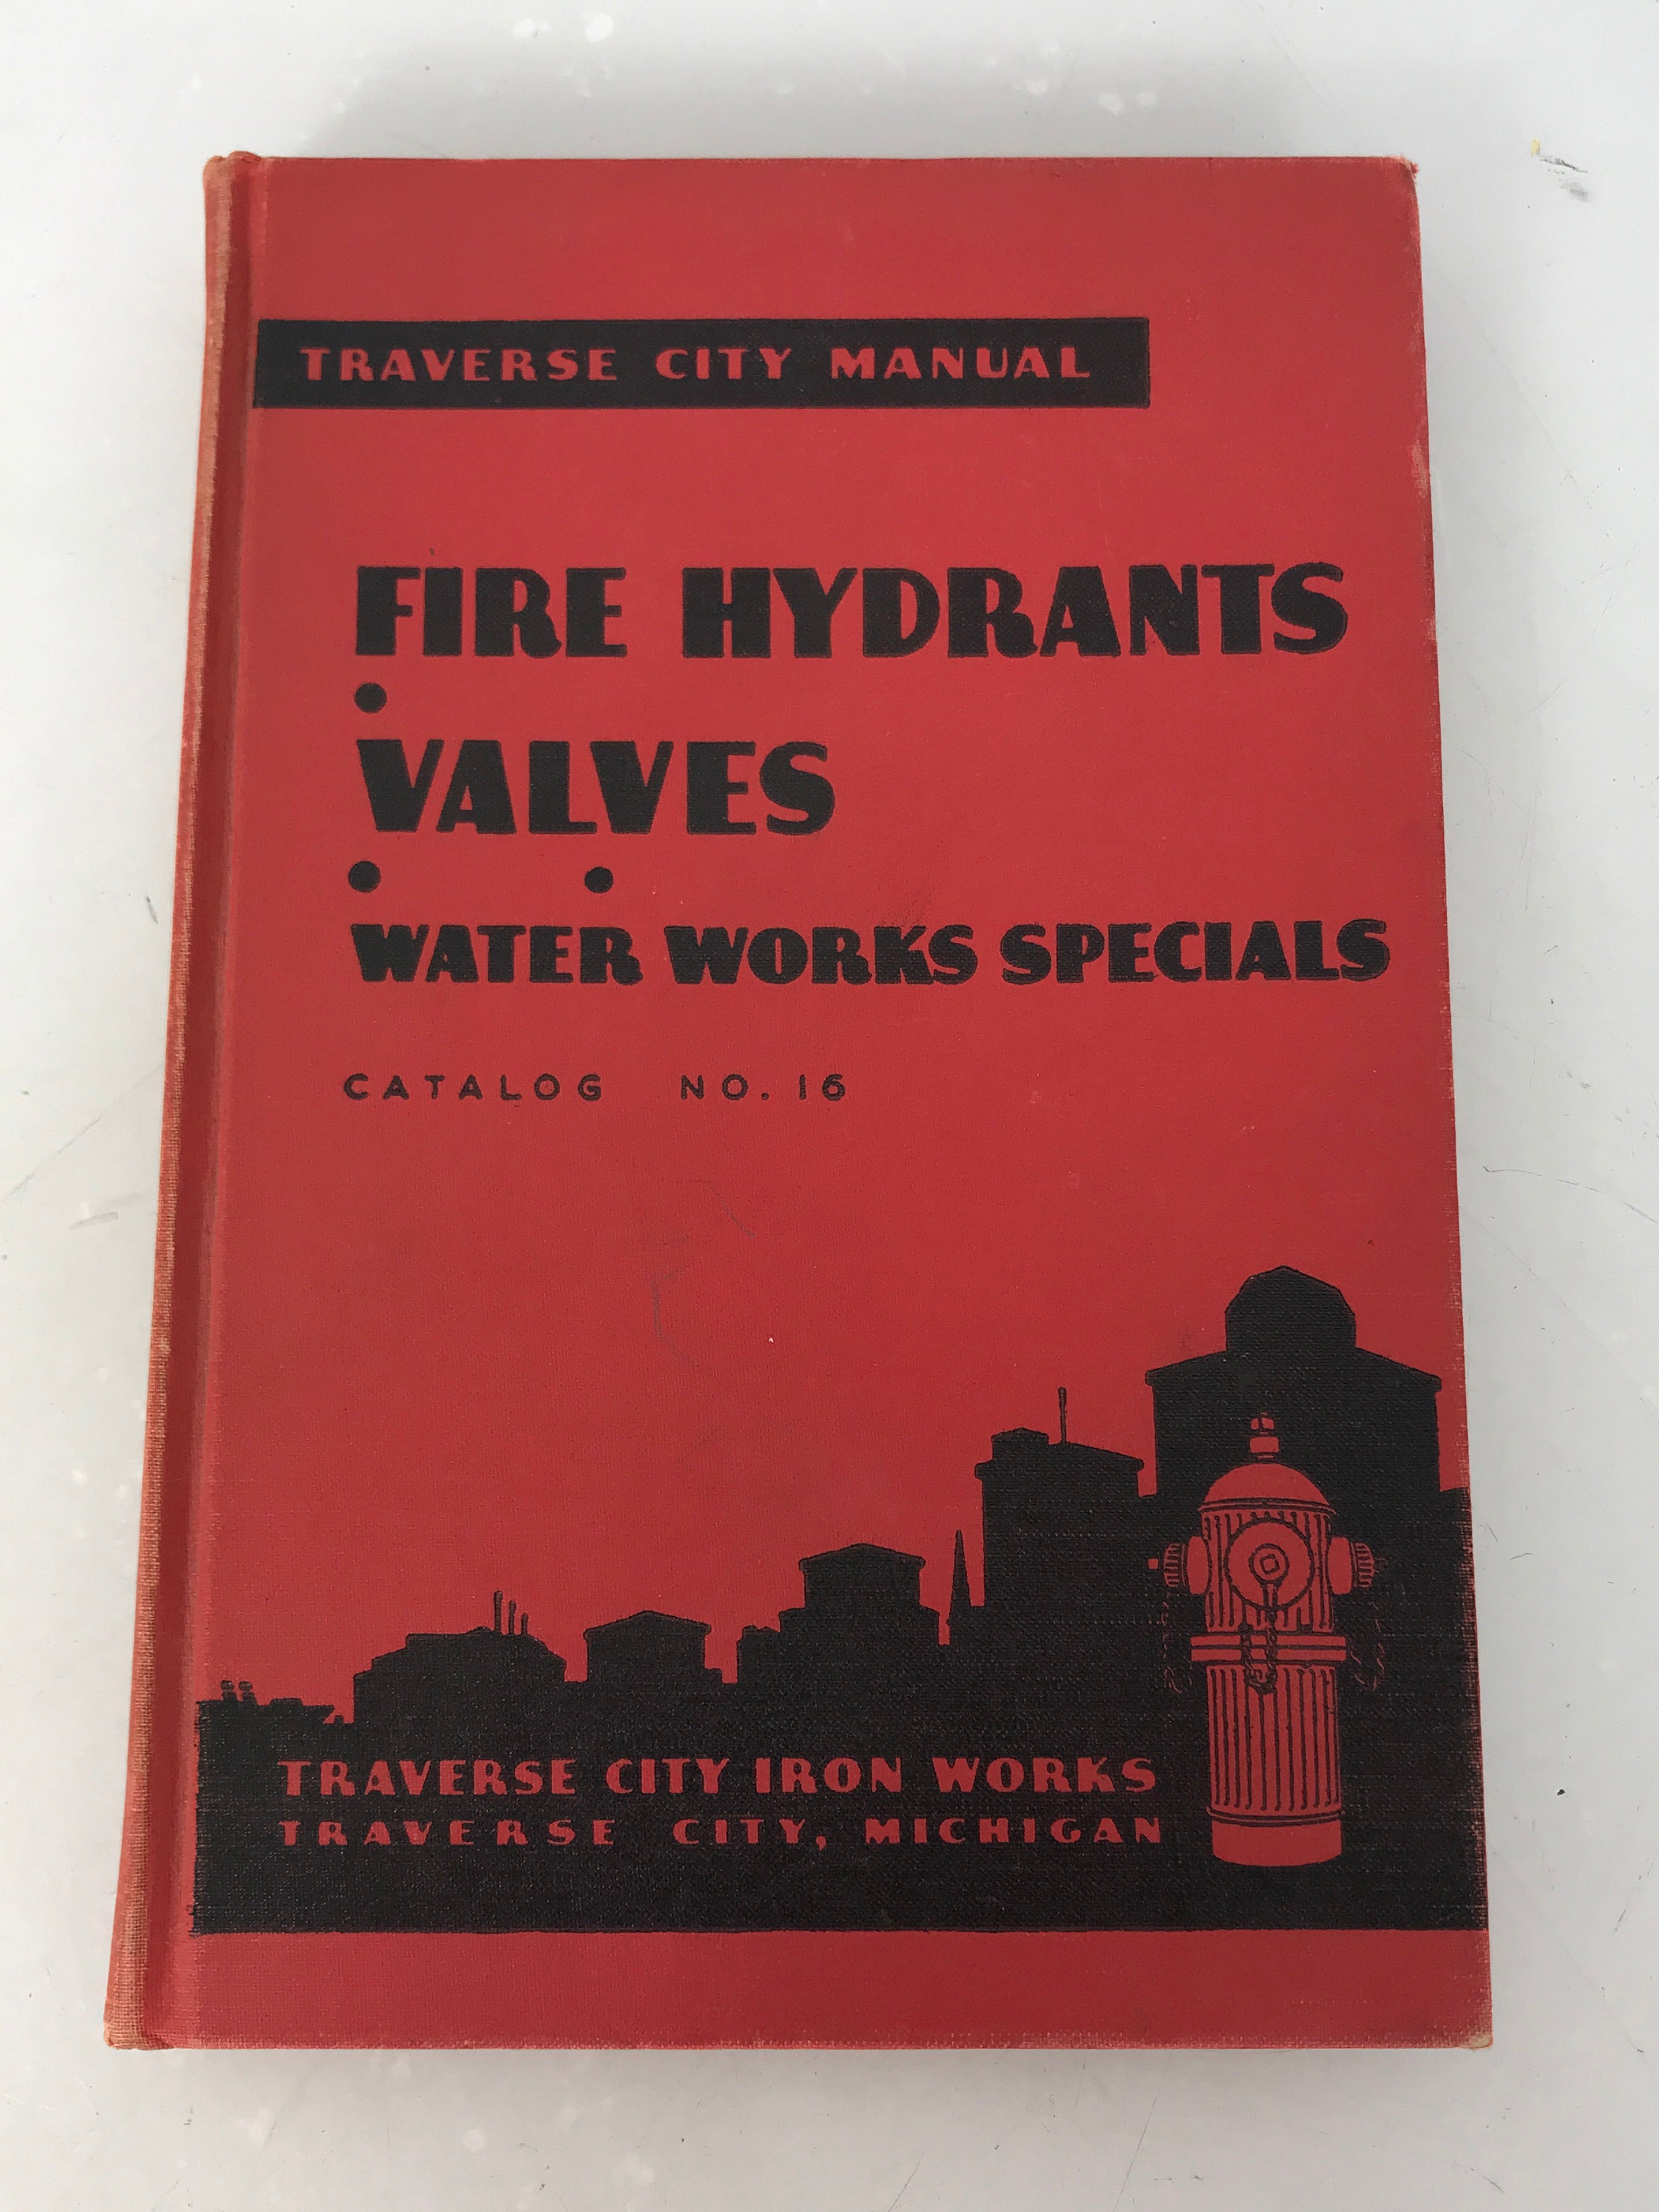 Traverse City Manual Fire Hydrants Valves Water Works Specials Catalog No. 16 HC